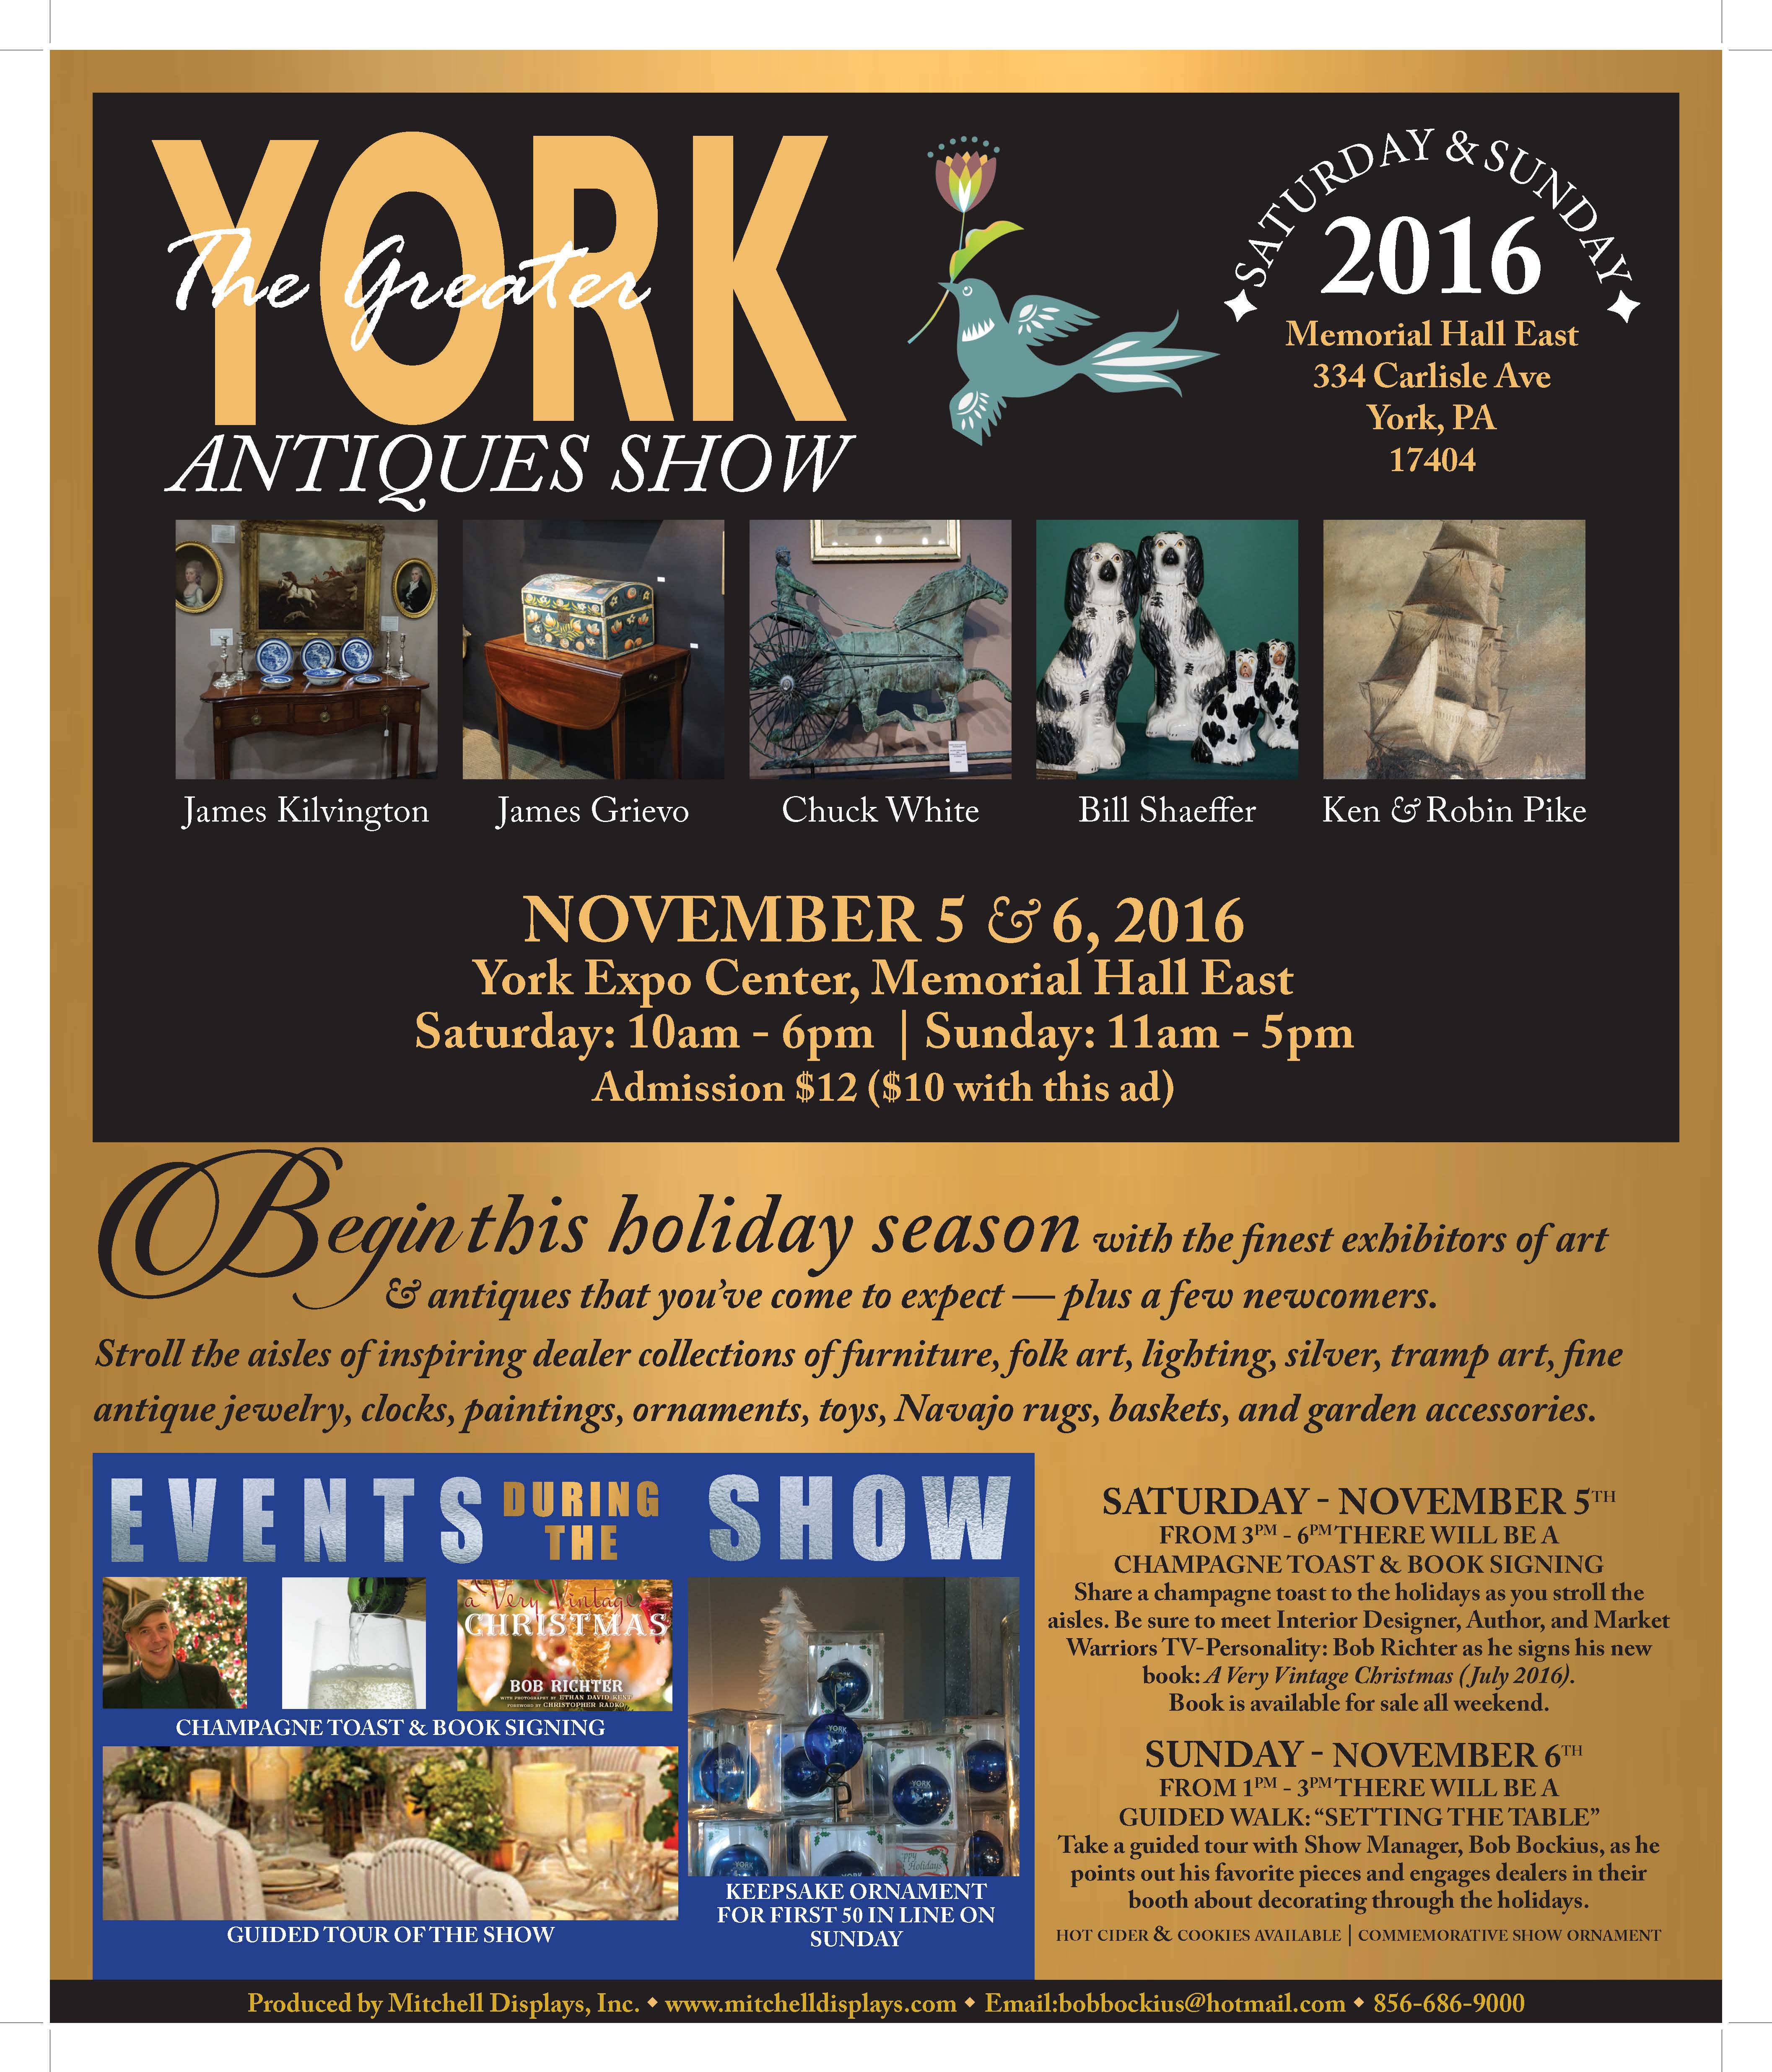 The Greater York Antiques Show, Mitchell Displays, Inc. at York Expo